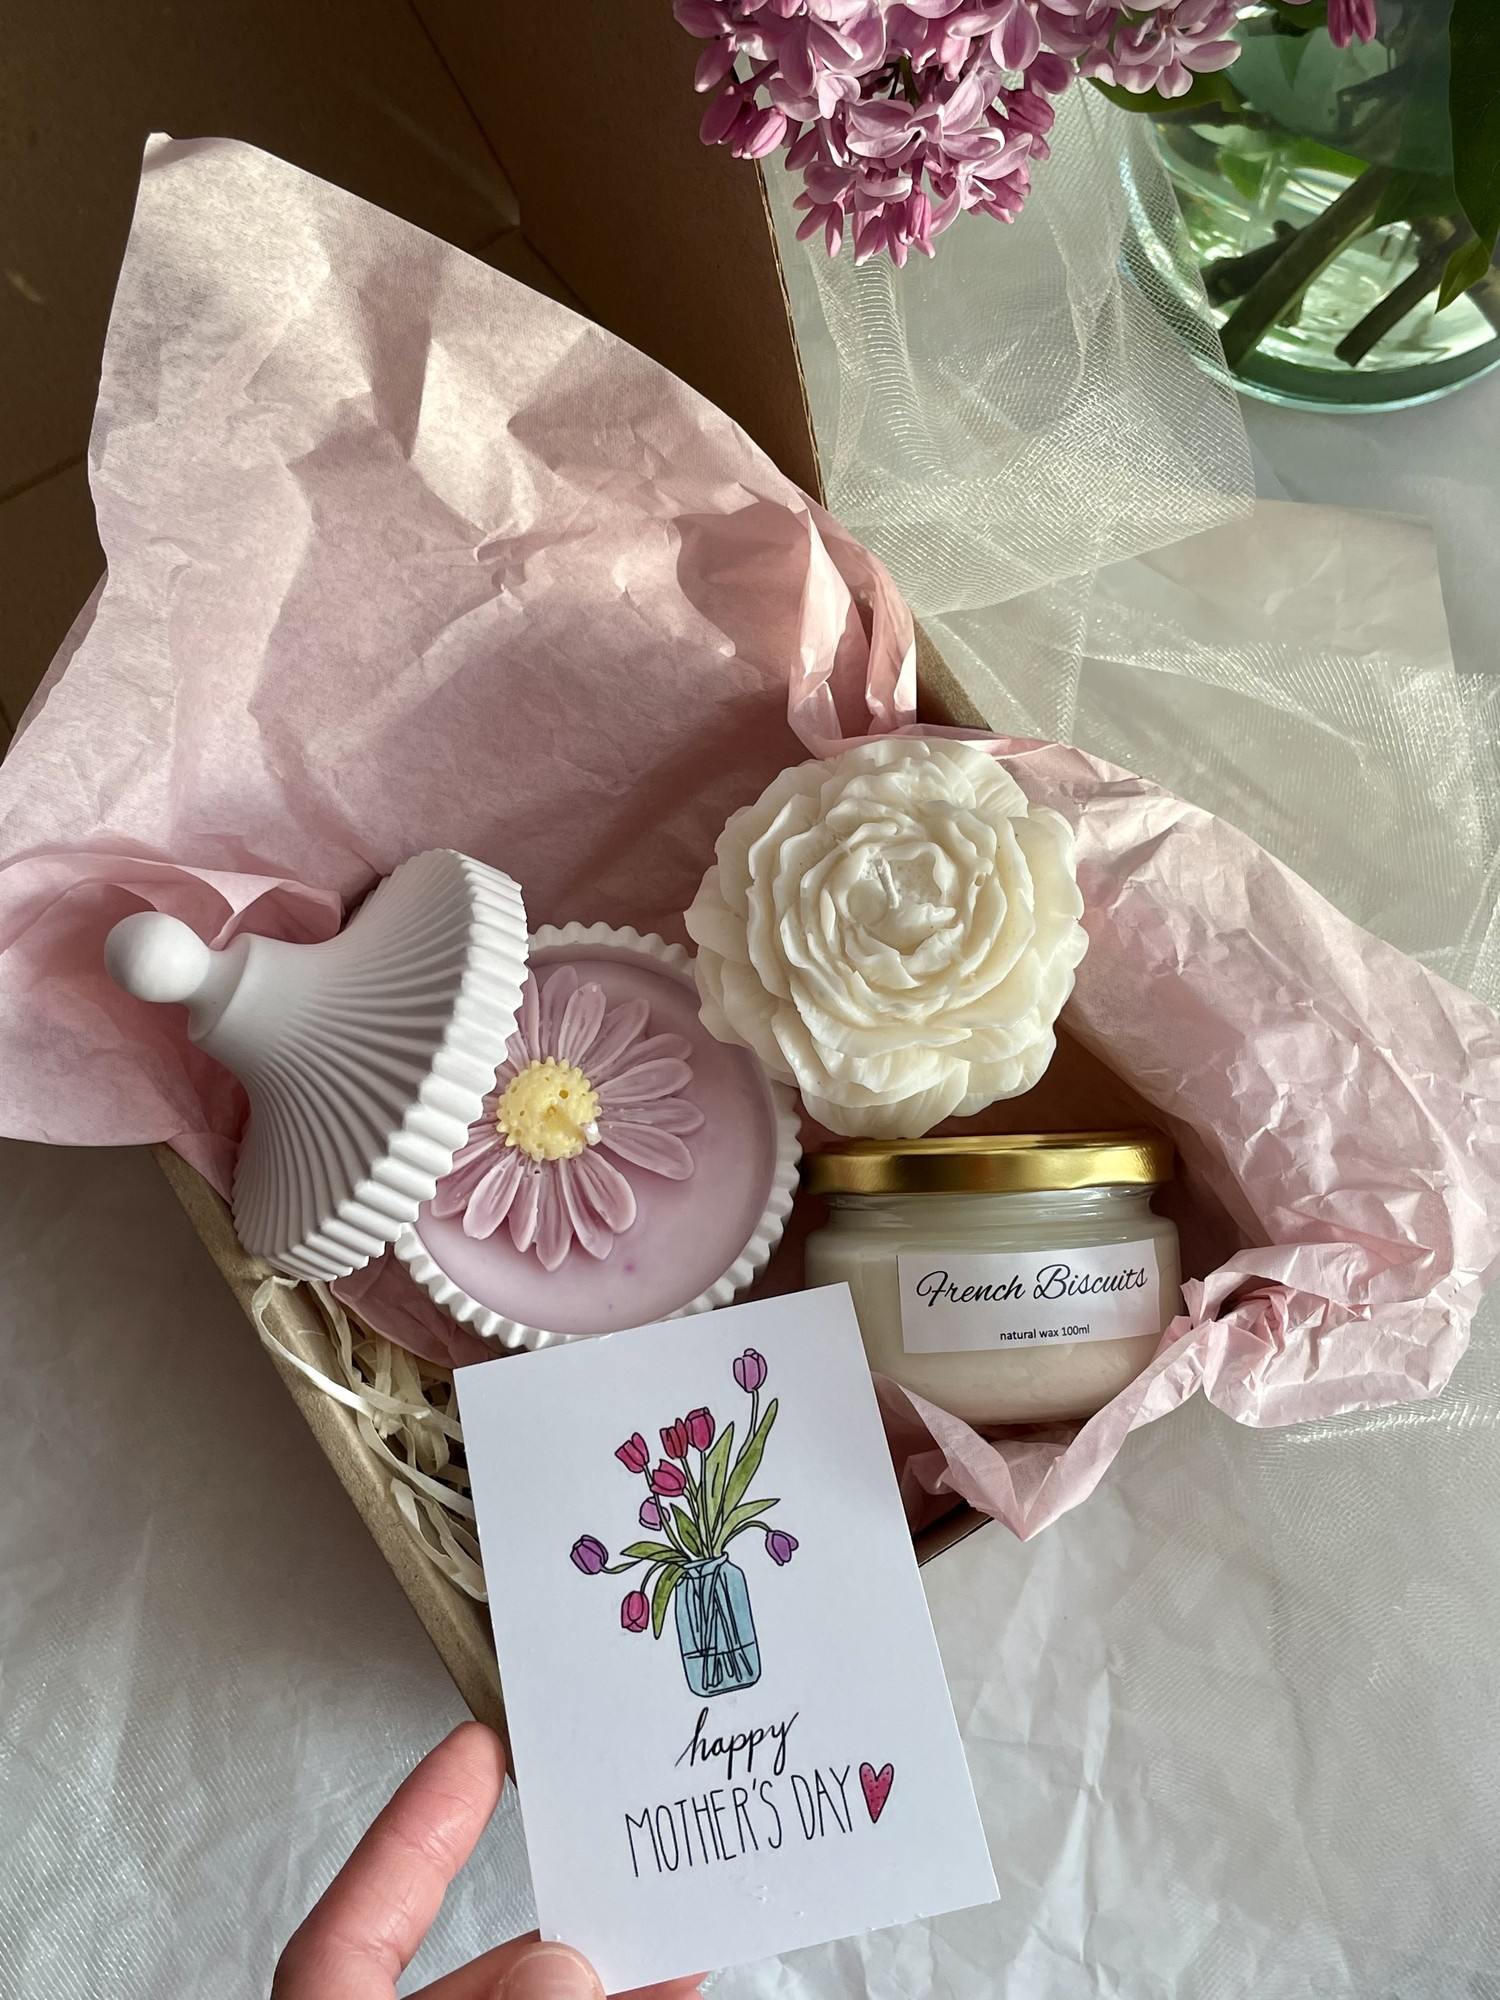 A gift box for Mother's Day made of soy candles